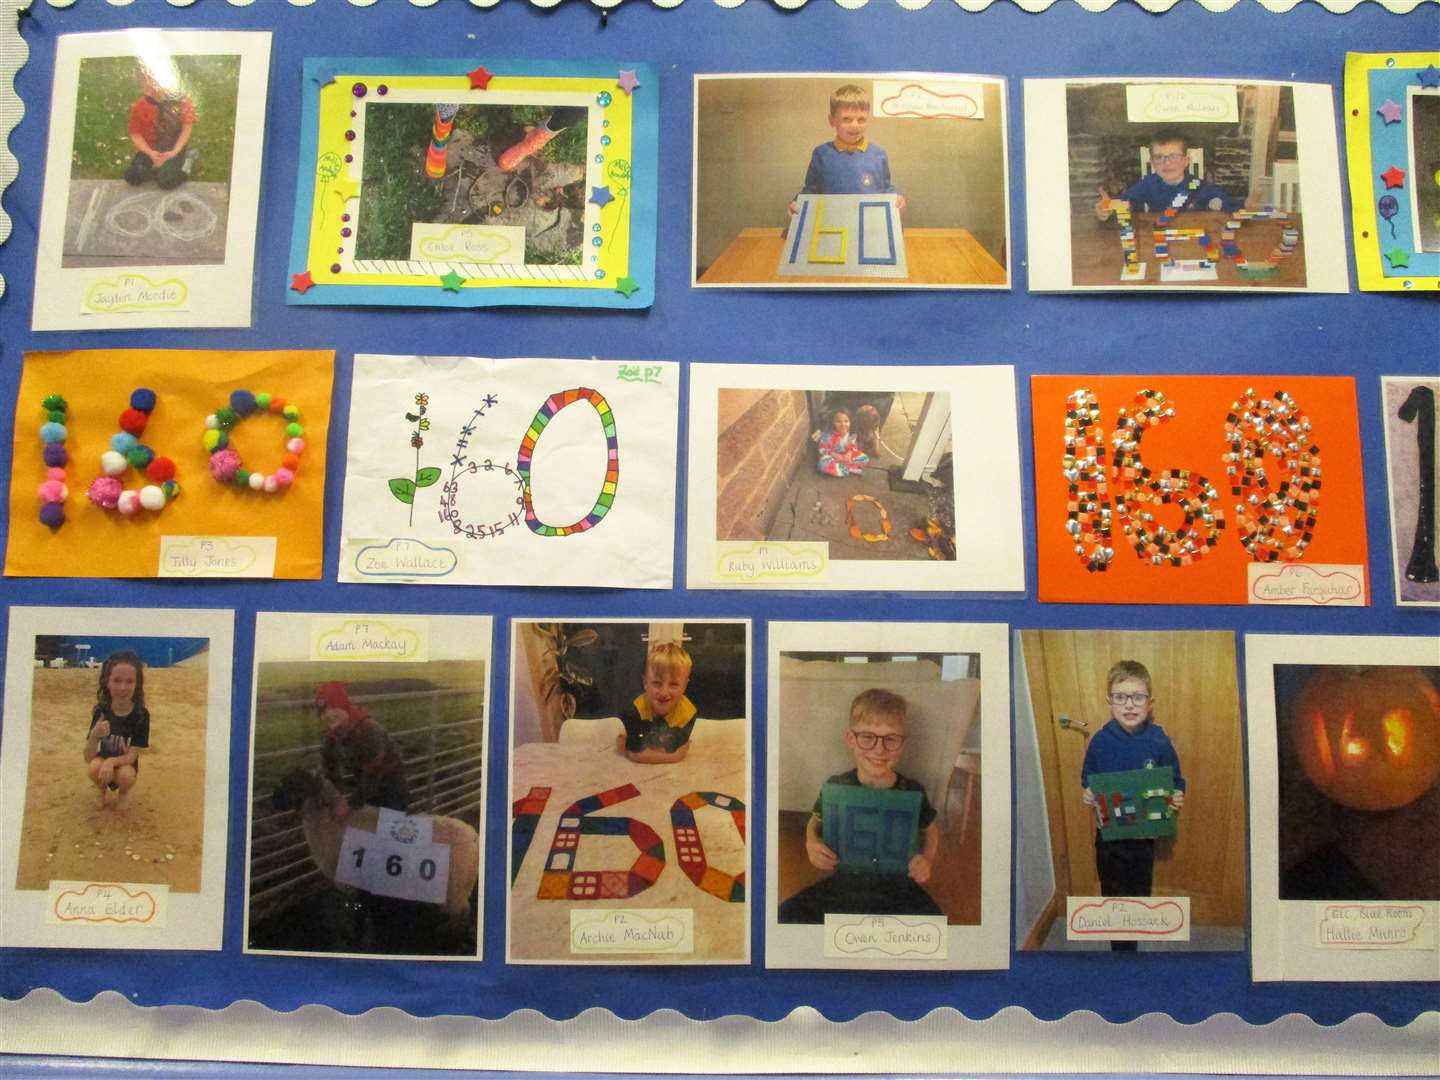 Another creative collage by Thurso kids.